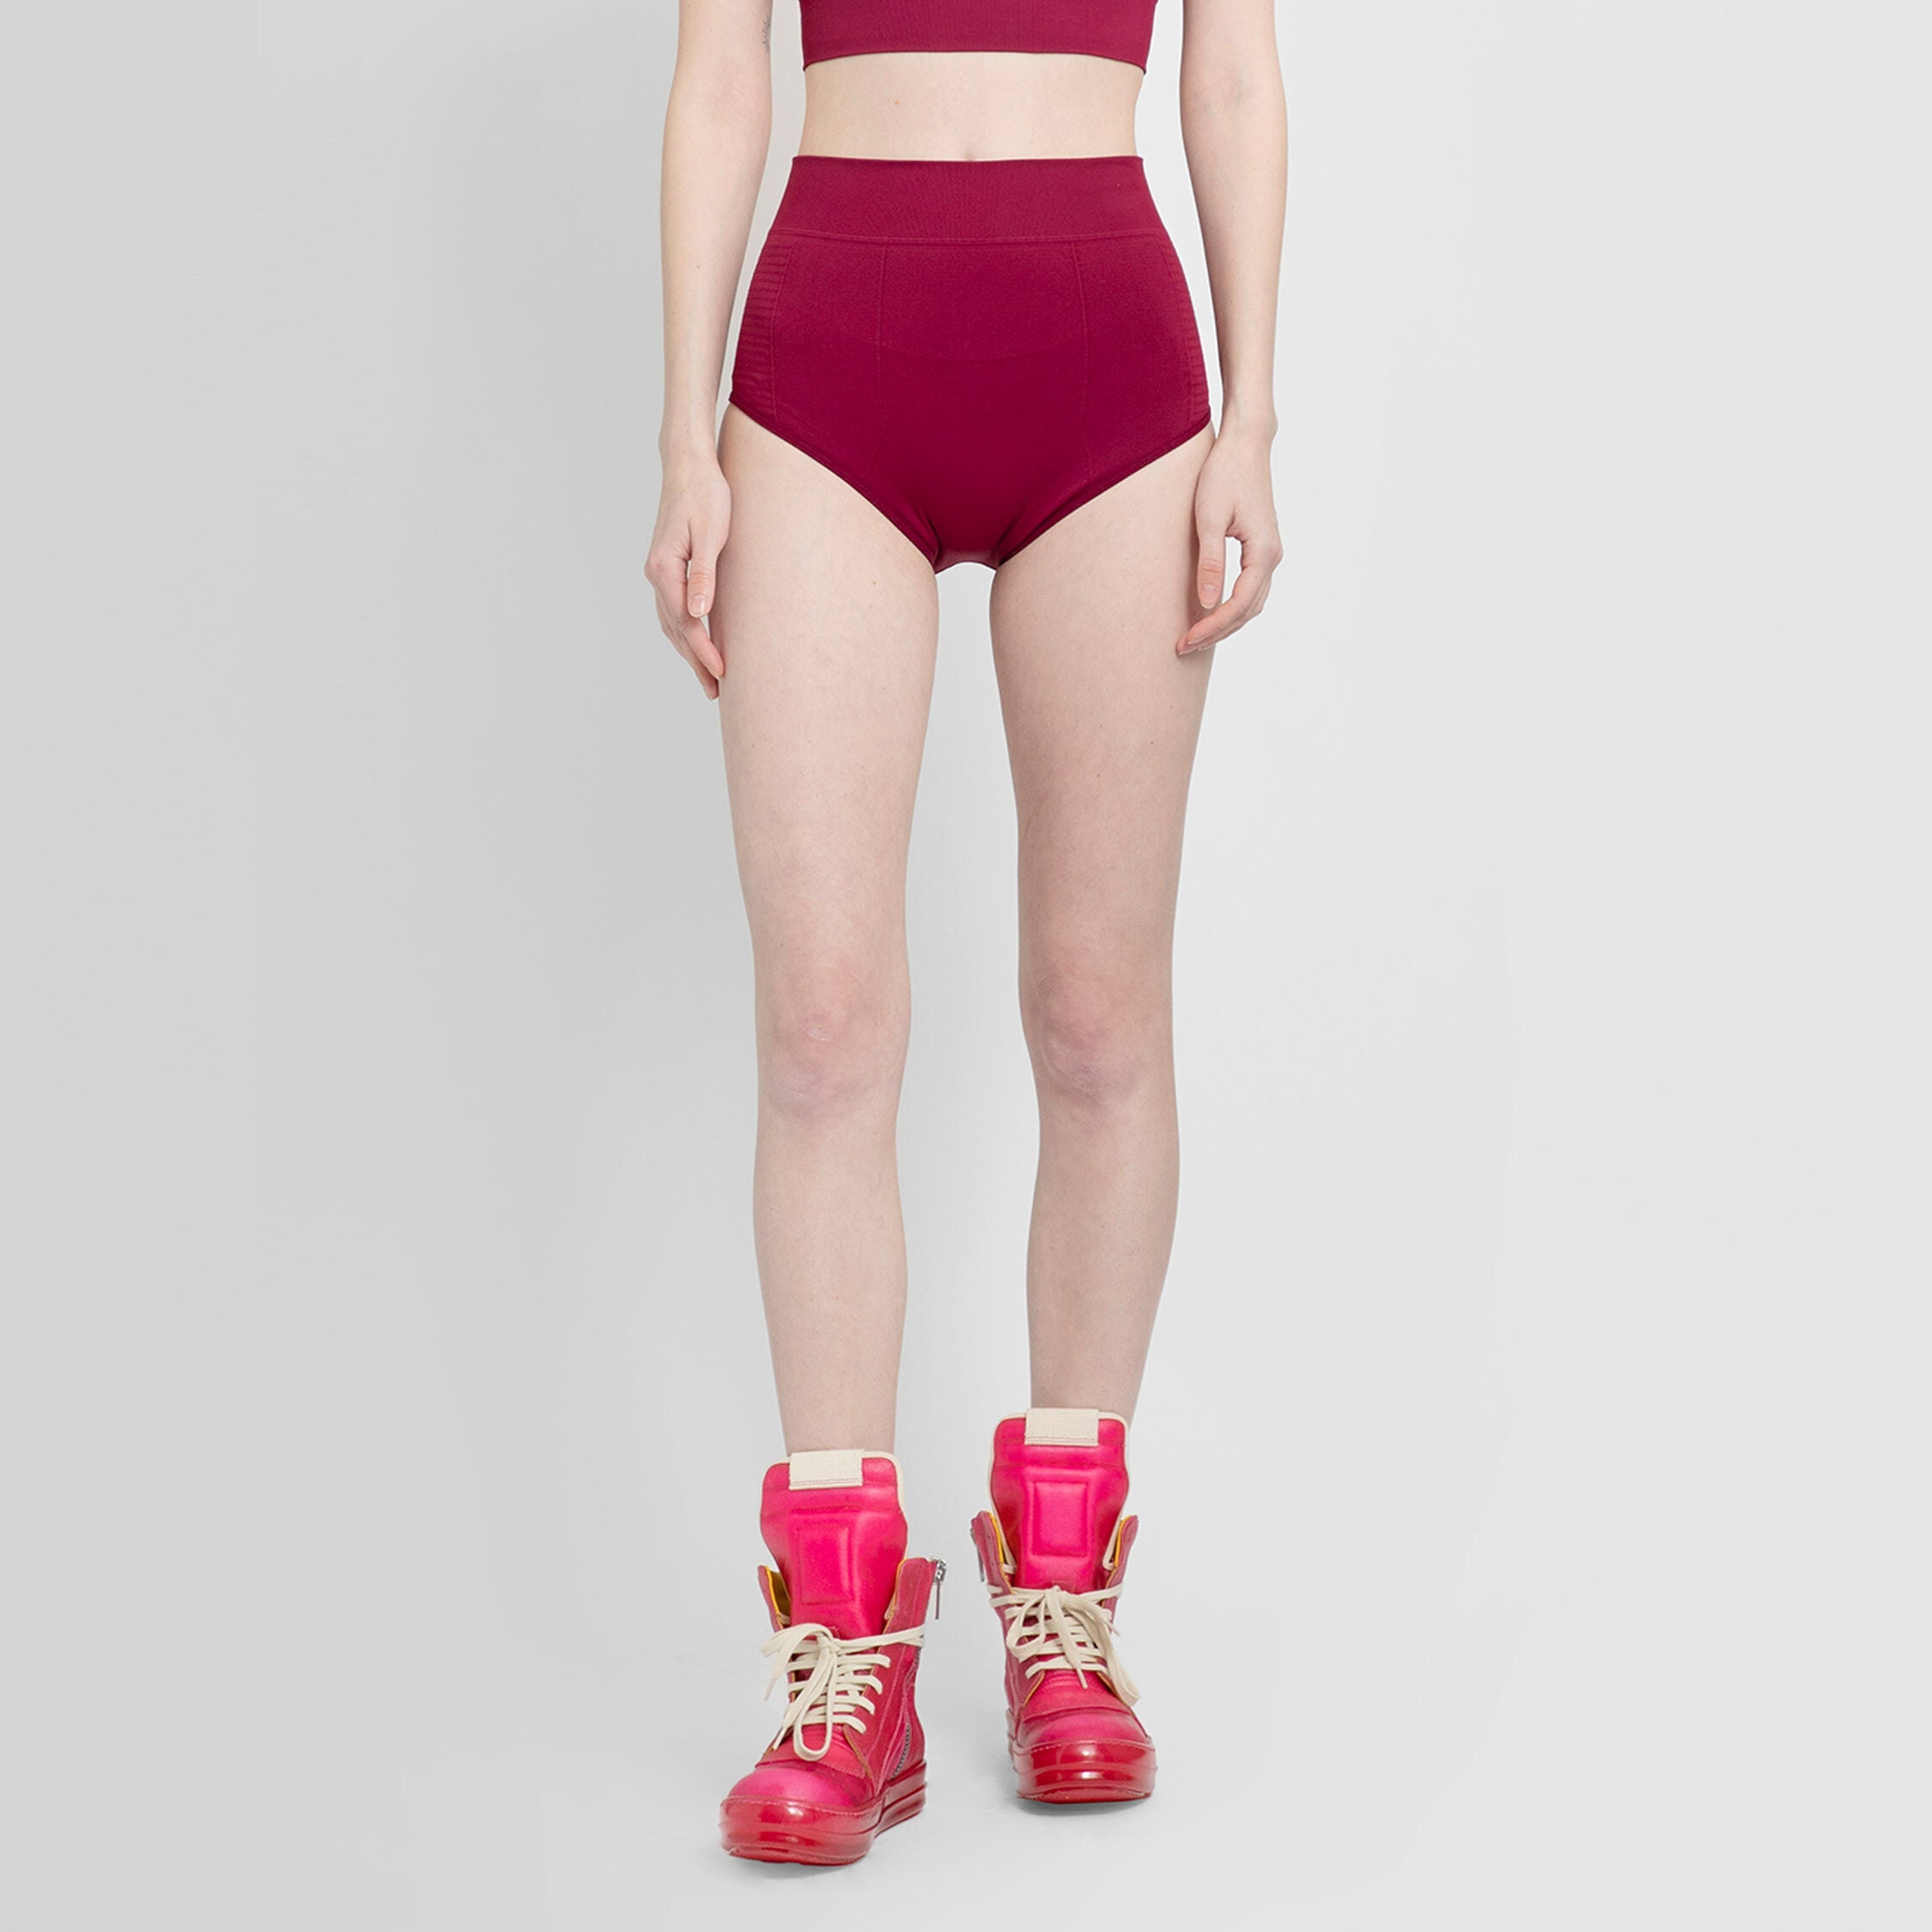 RICK OWENS WOMAN RED LINGERIE - 6